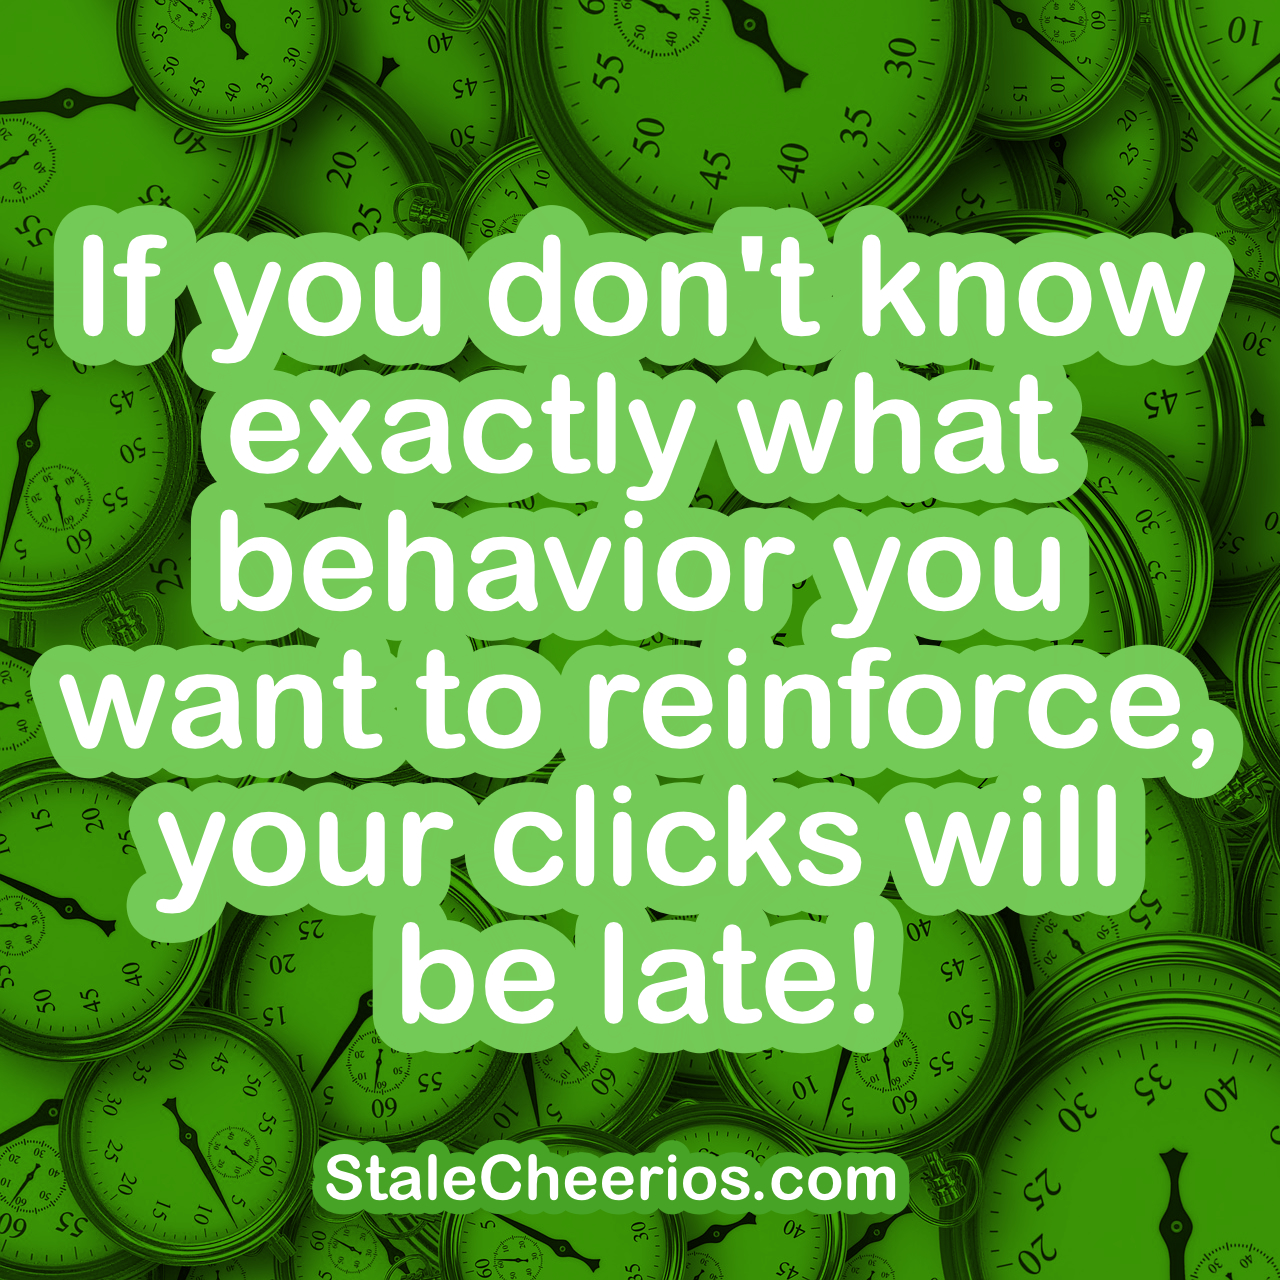 Image reads: If you don't know exactly what behavior you want to reinforce, your clicks will be late!